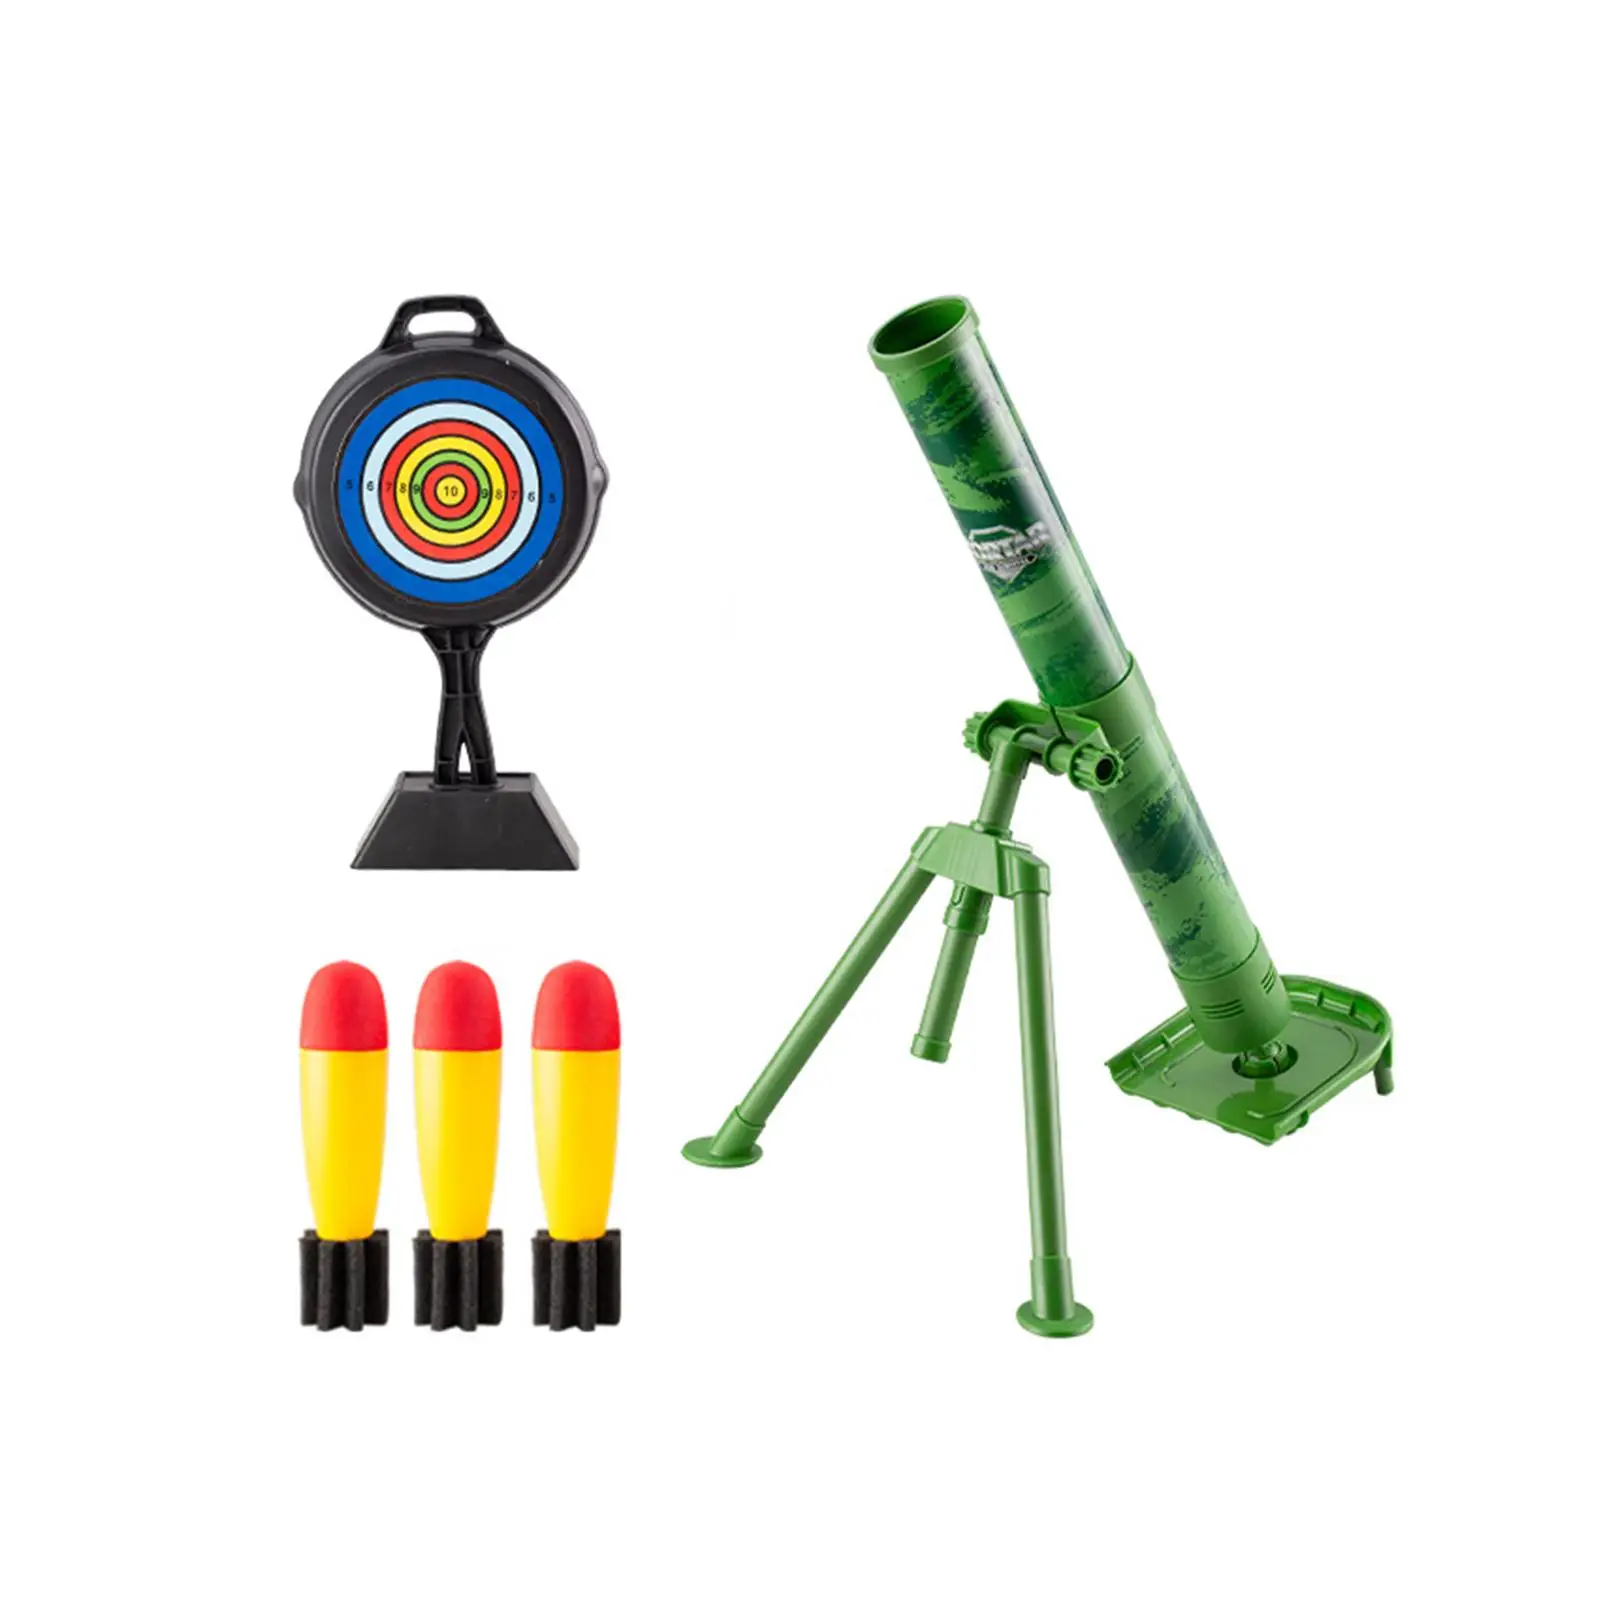 Mortar Launcher Toys Chase Rocket for Kids Boys and Girls Birthday Present